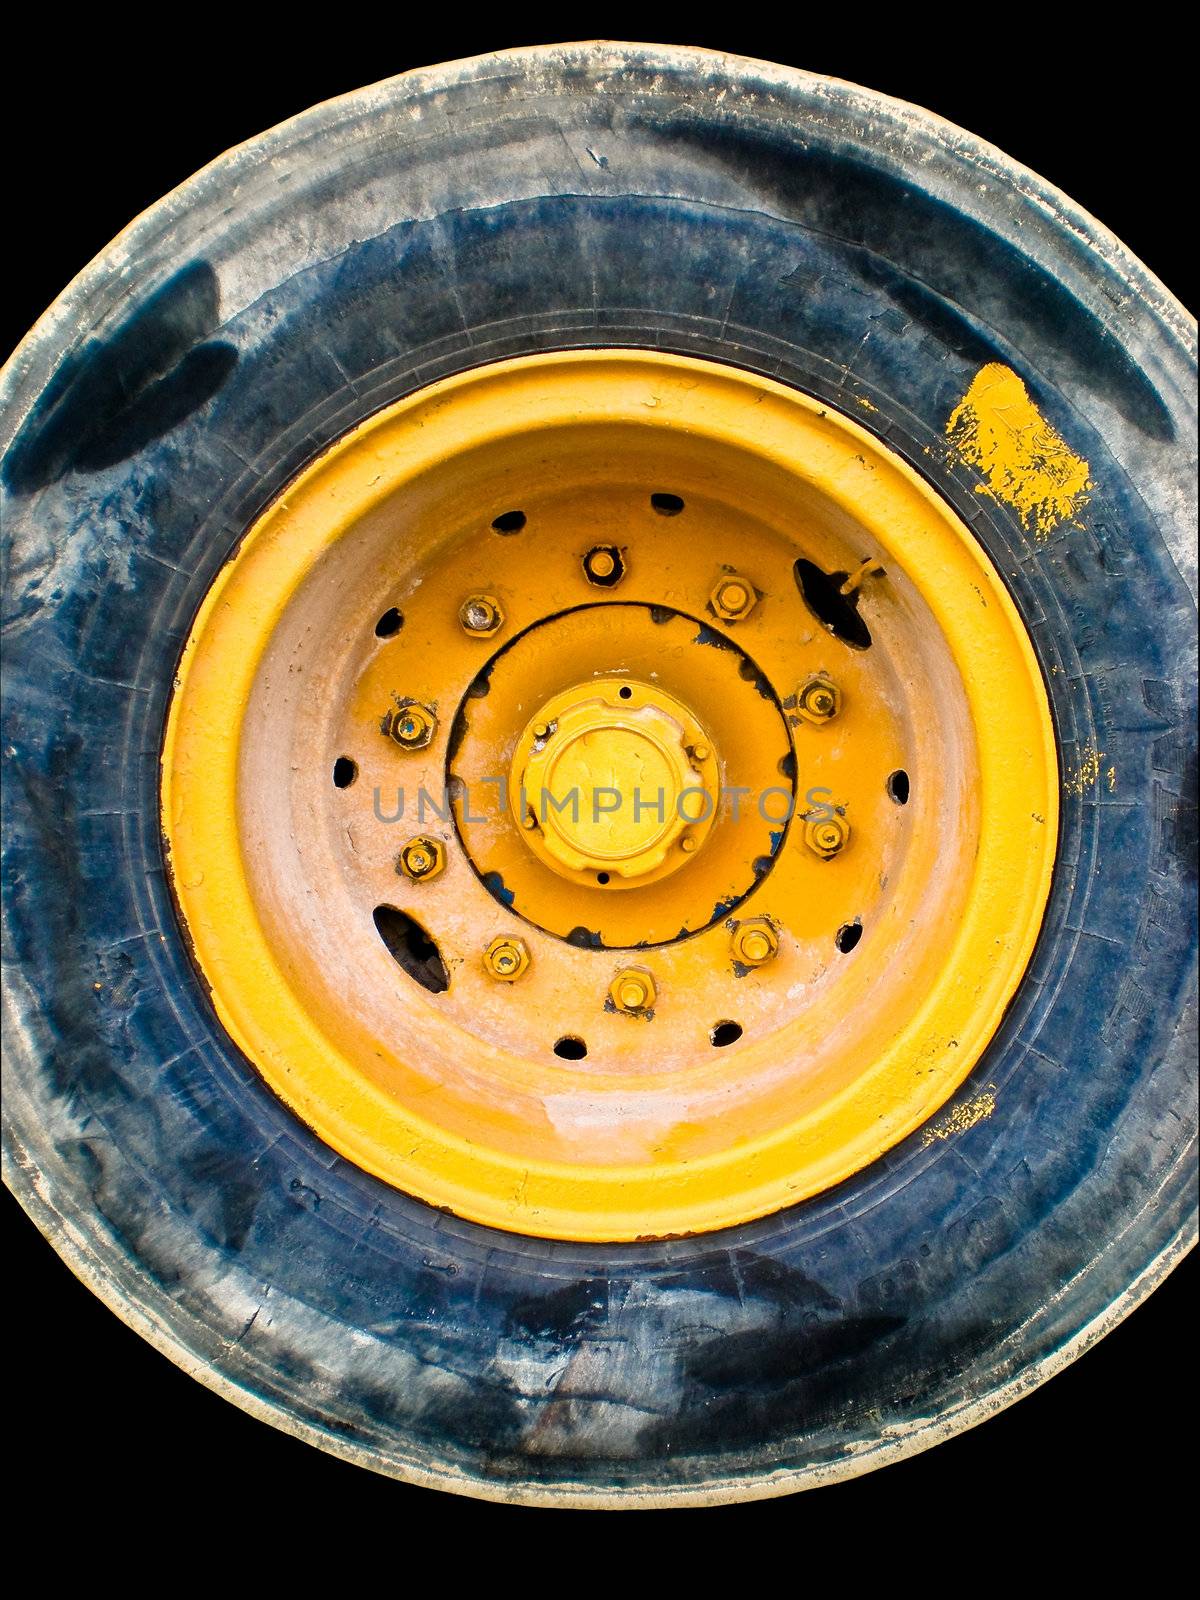 Stained truck tire on a black background